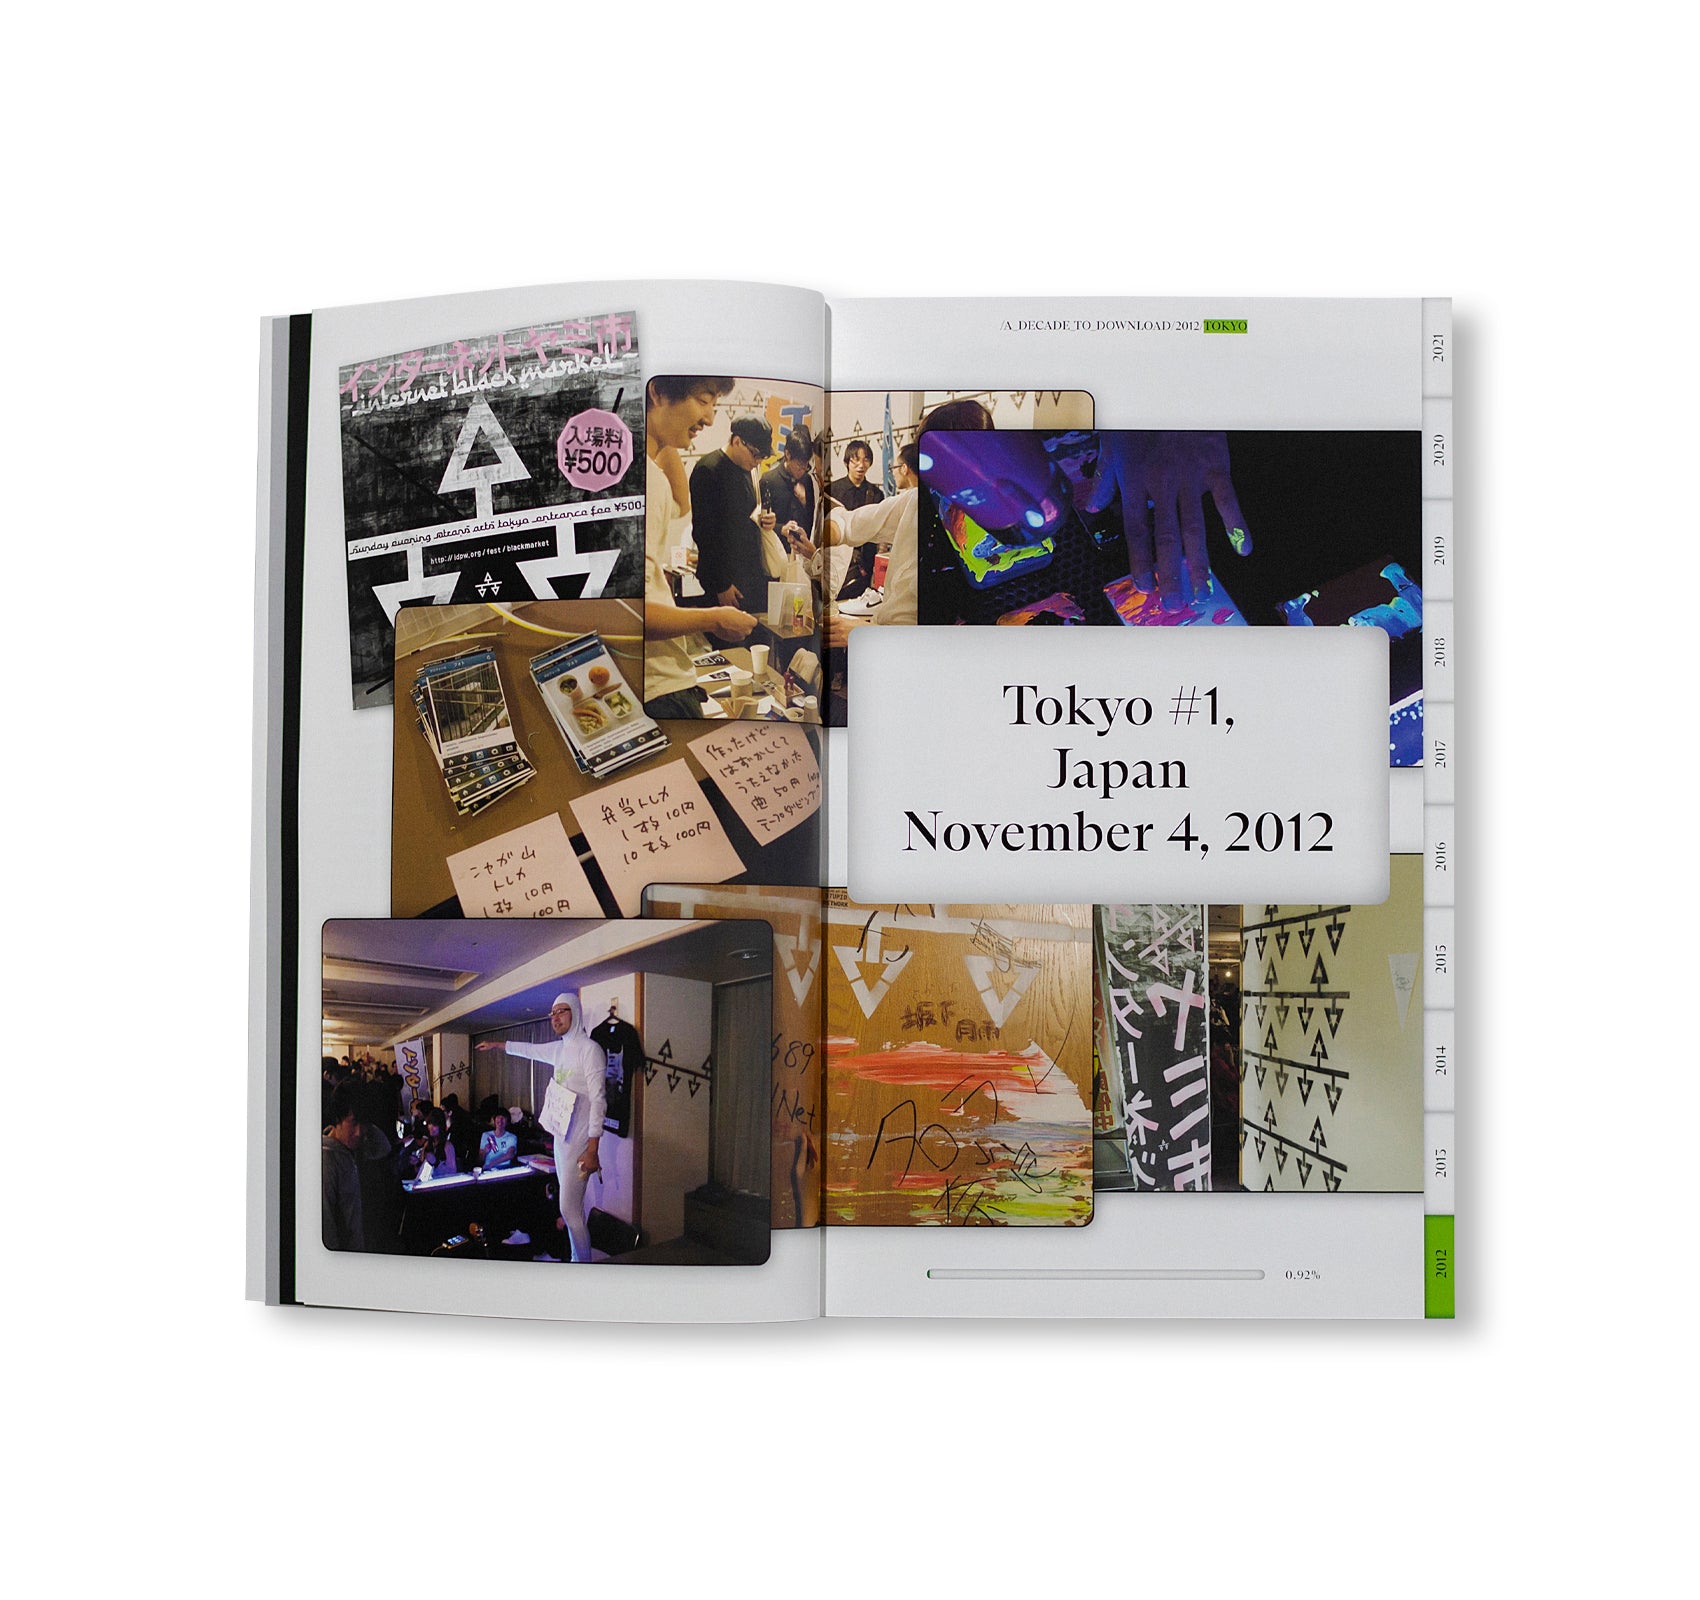 A DECADE TO DOWNLOAD – THE INTERNET YAMI-ICHI 2012 - 2021 by A Decade To Download Project Team [SPECIAL EDITION]